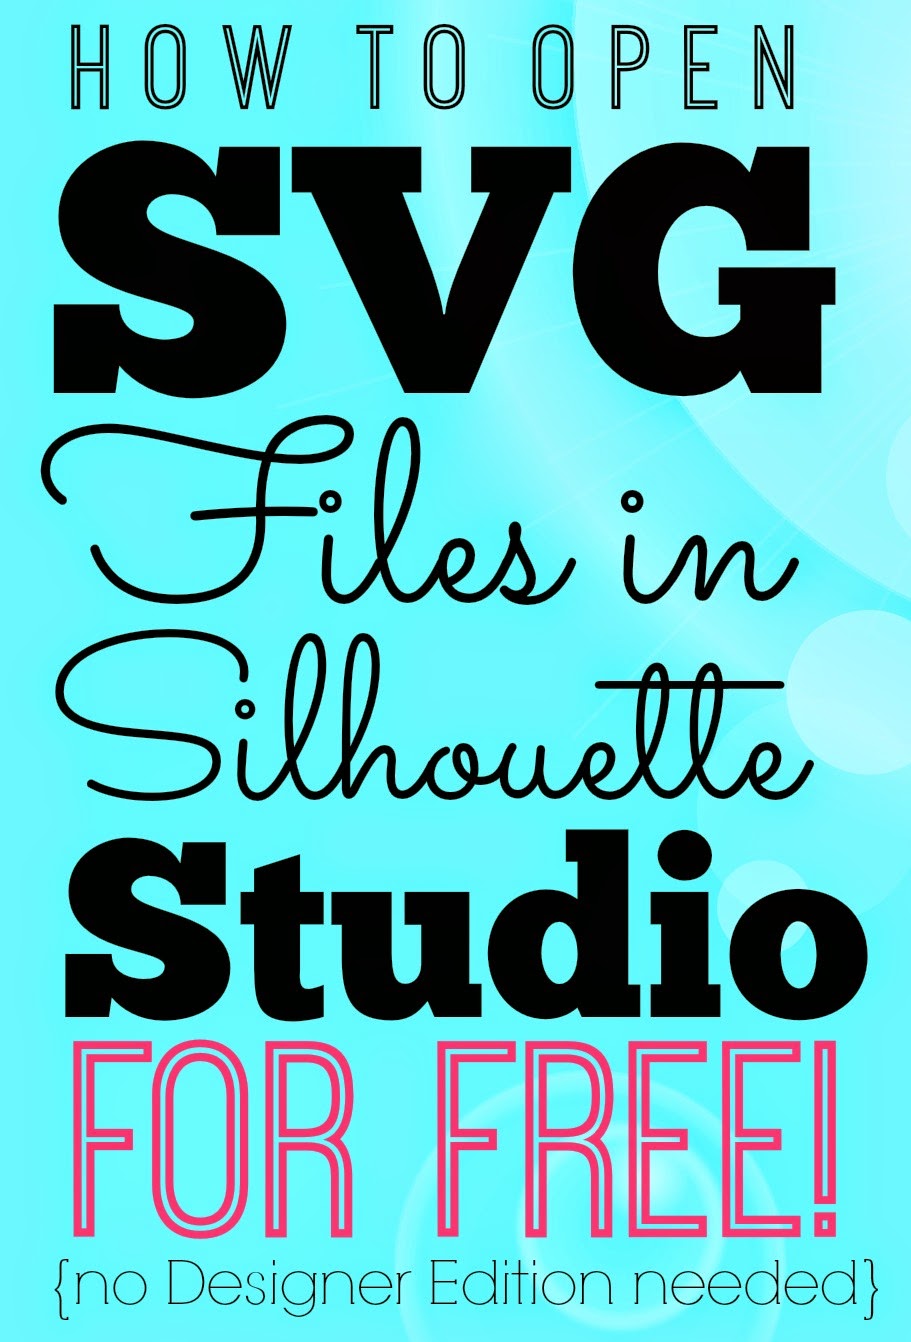 Download Opening Svgs In Silhouette Studio For Free Without Designer Edition Silhouette School